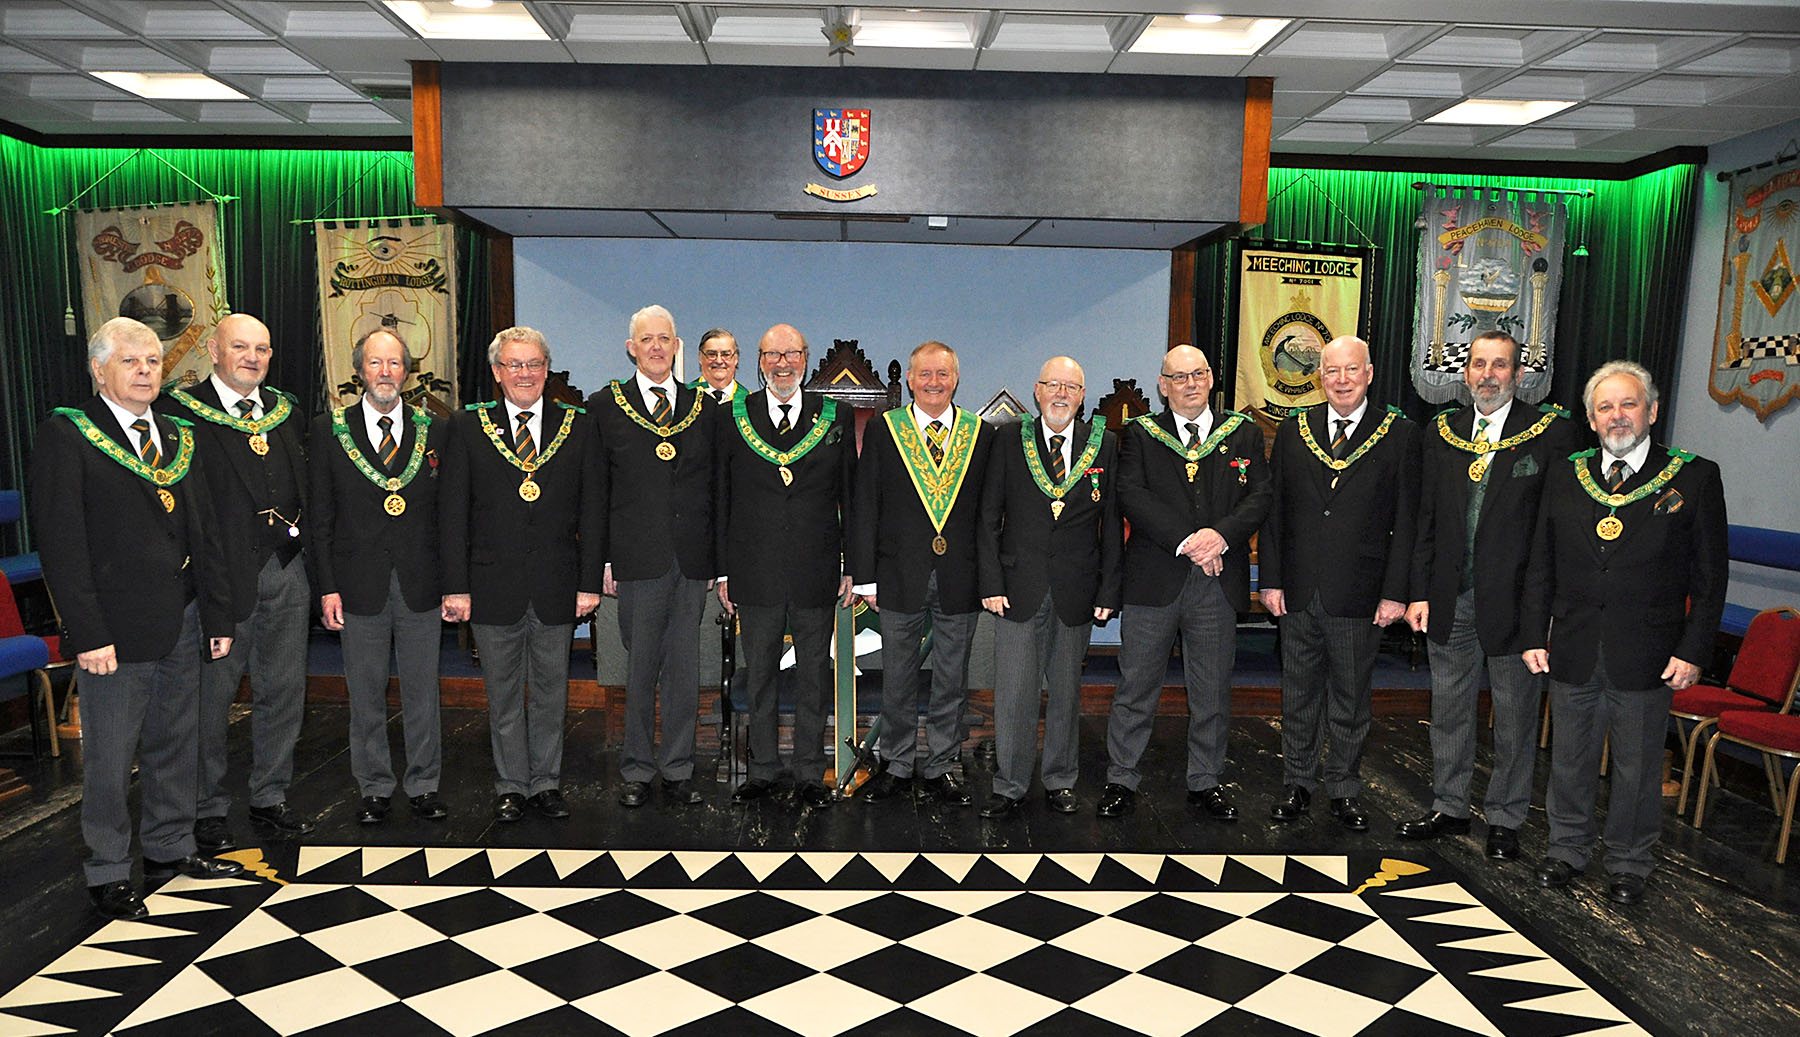 The Distirict Grand Prefect for Sussex accompanied by visiting DGP's and the P.D.G.M., R.W.Bro Clive Manuel